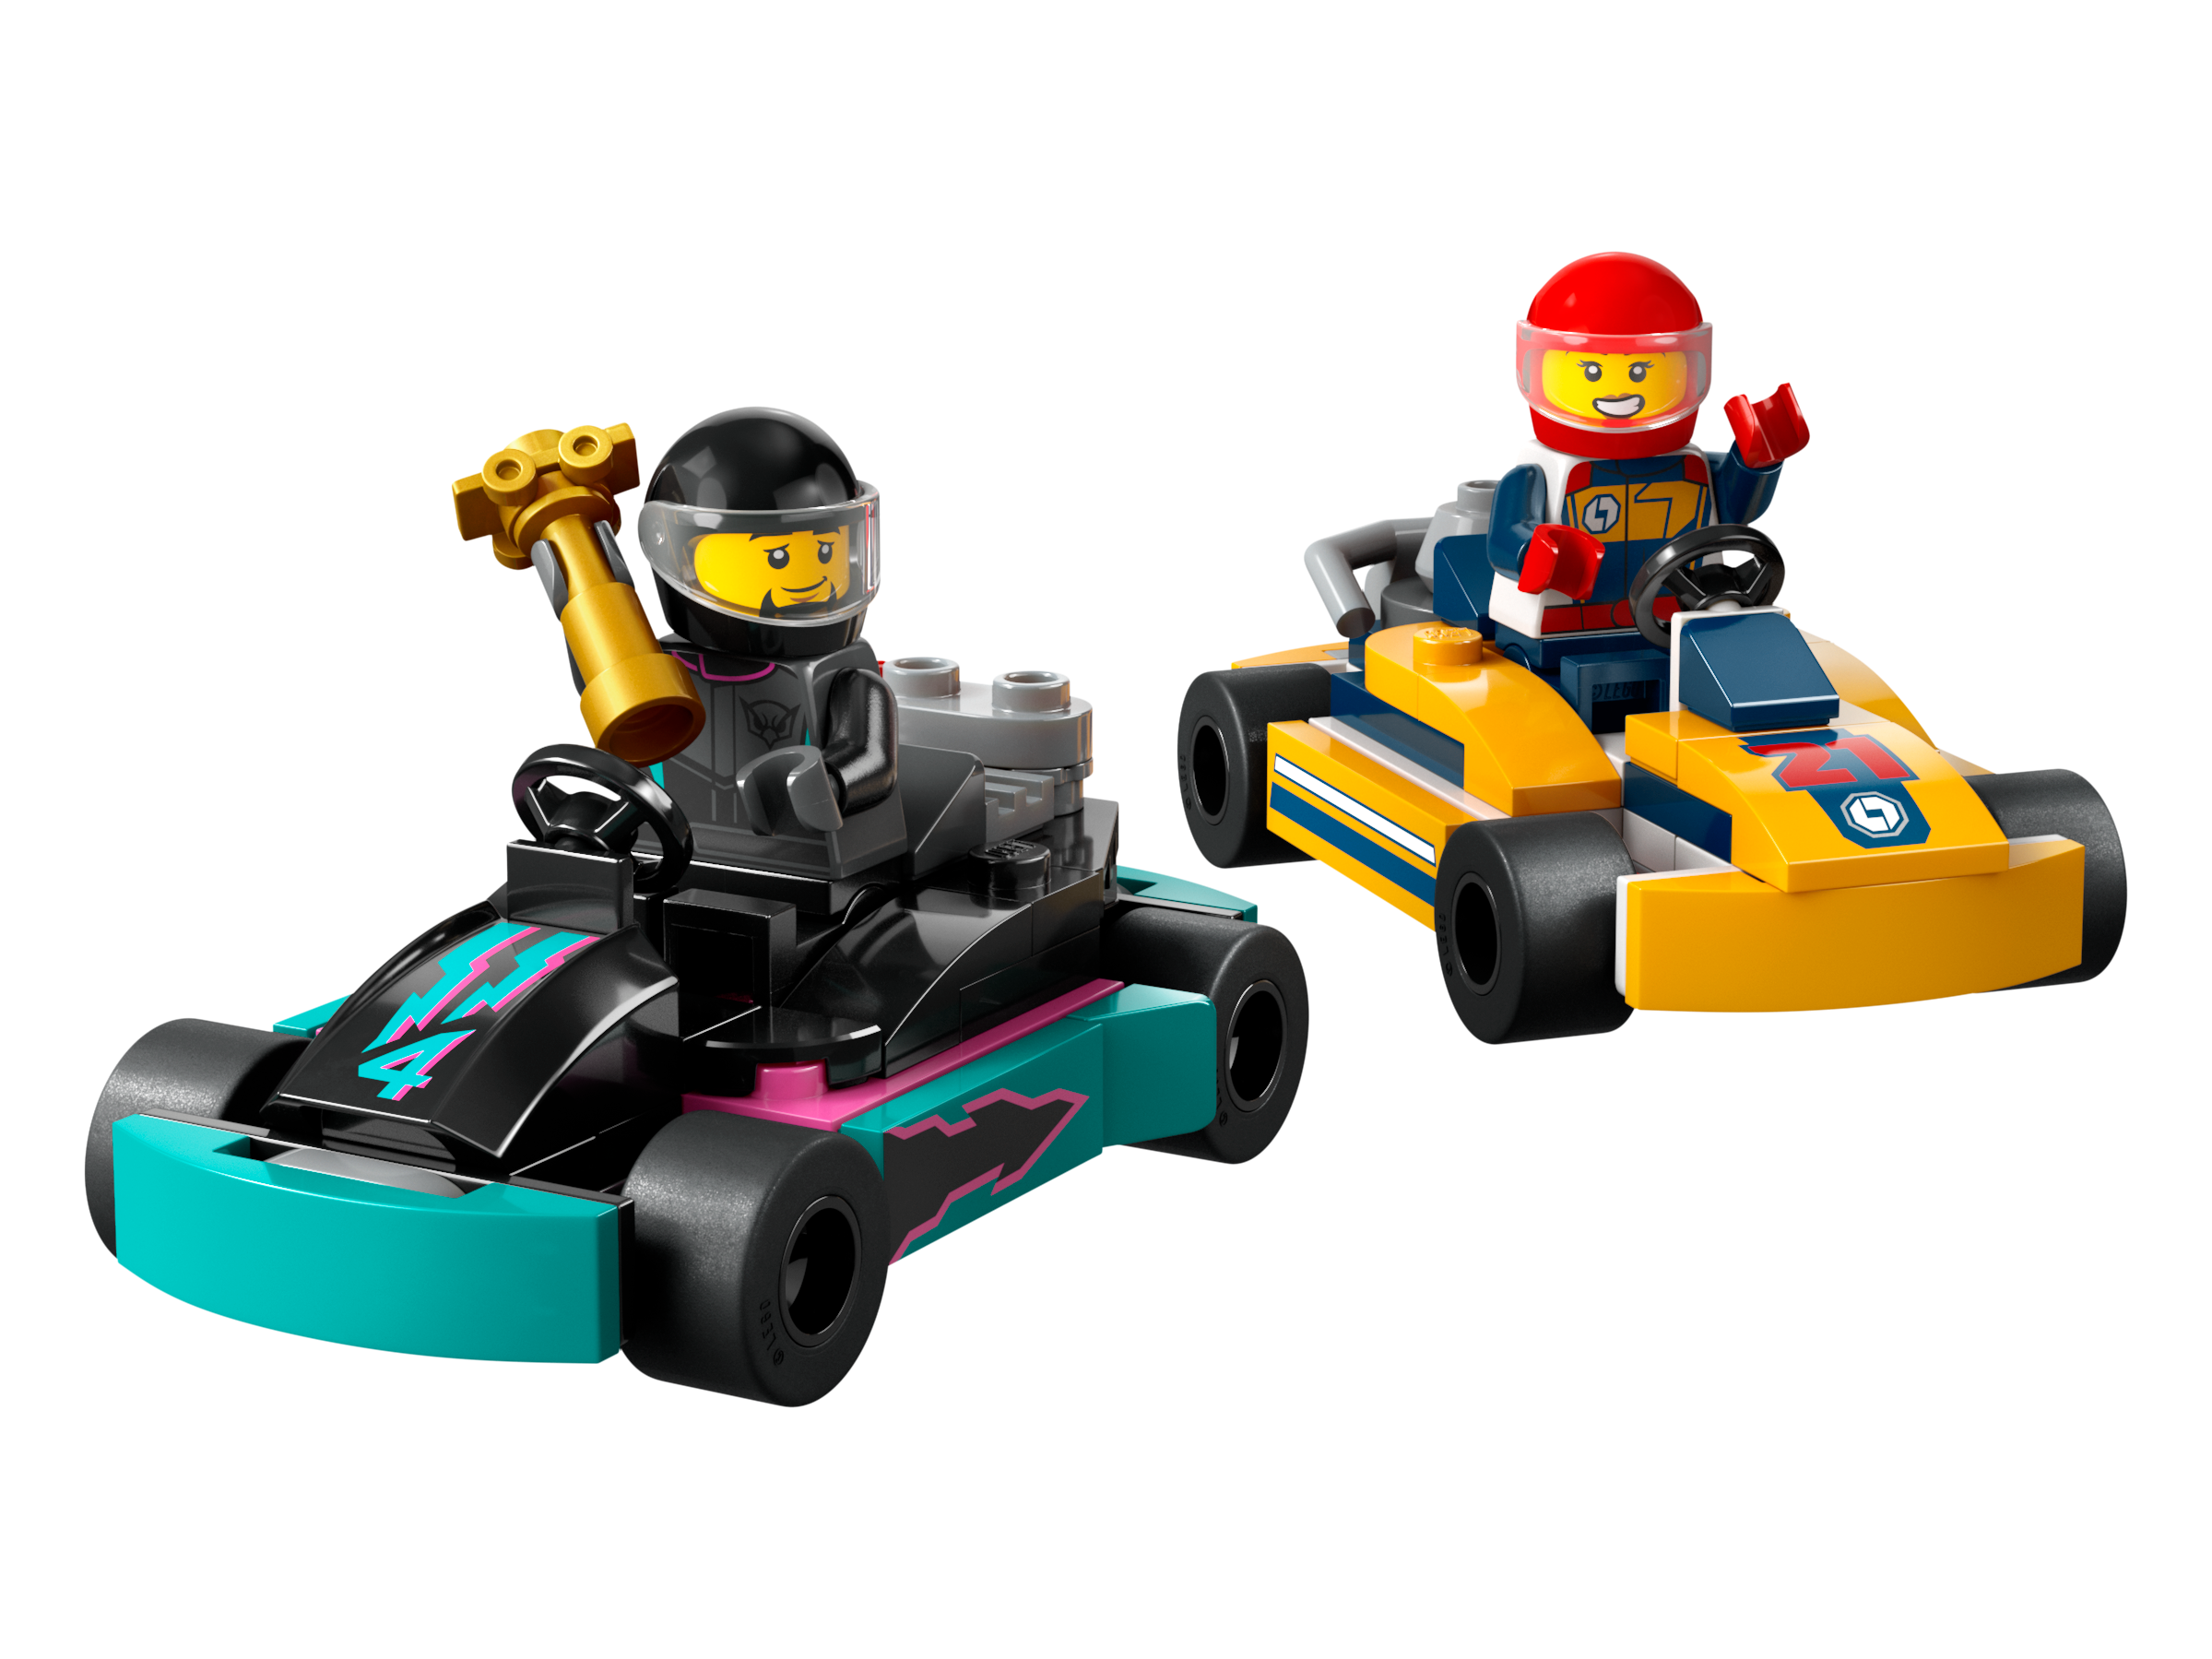 Go-Karts and Race Drivers 60400, City